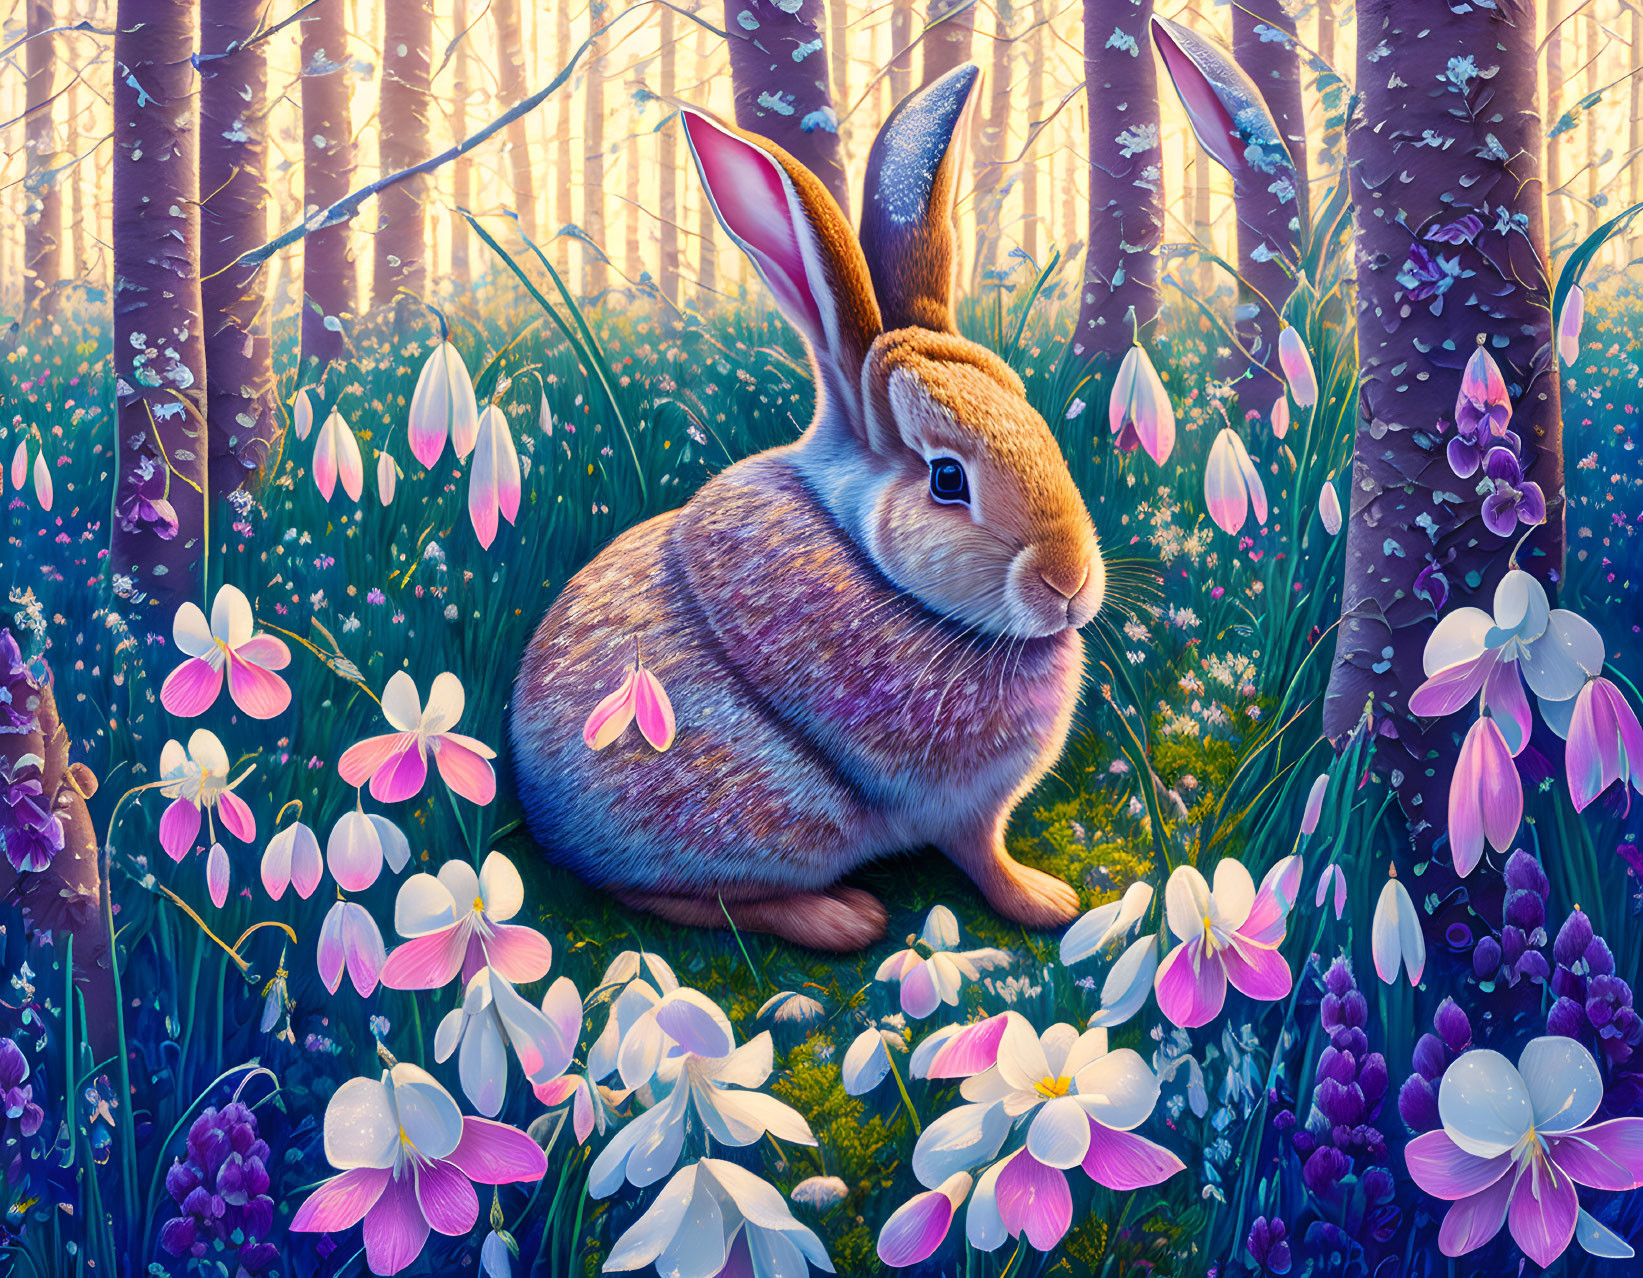 Illustration of rabbit in vibrant forest with sunlight